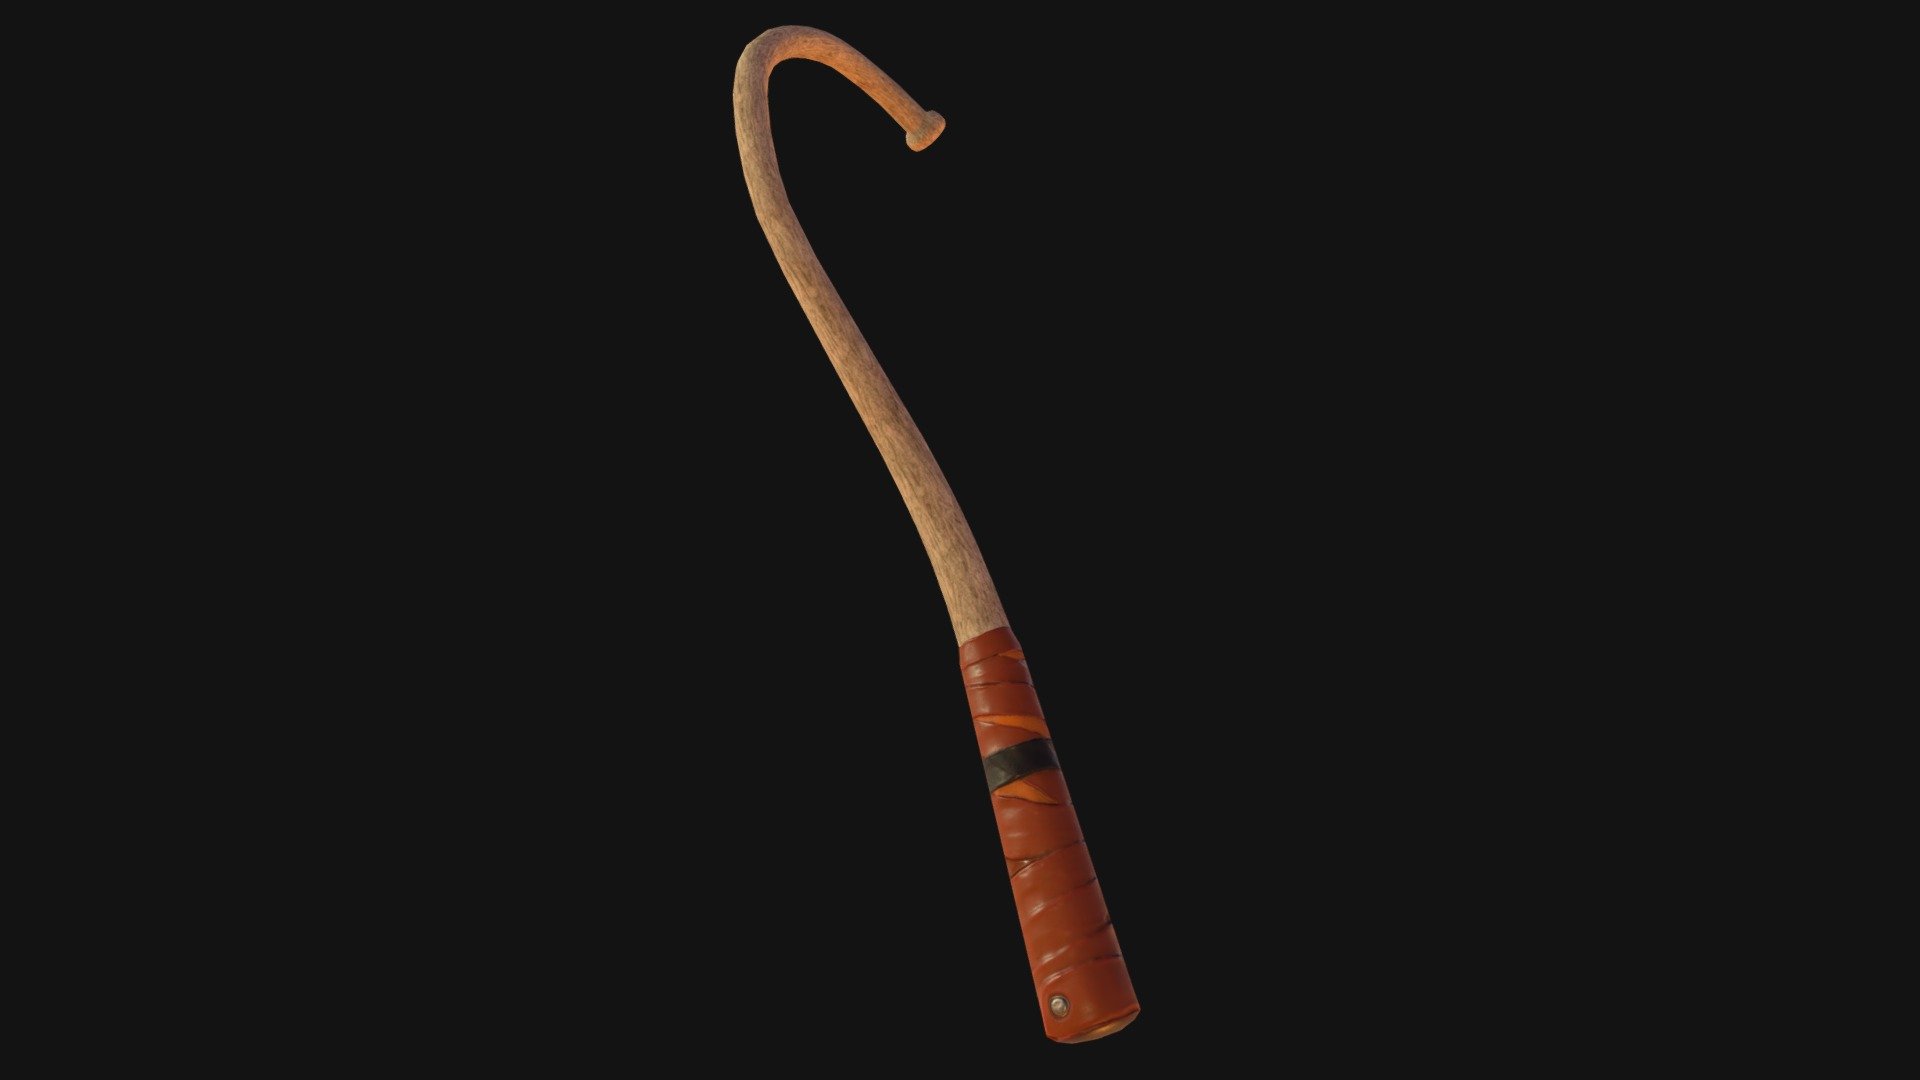 DrumStick - 3D model by Adeboye Grillo (@grillswills) [e463561] - Sketchfab